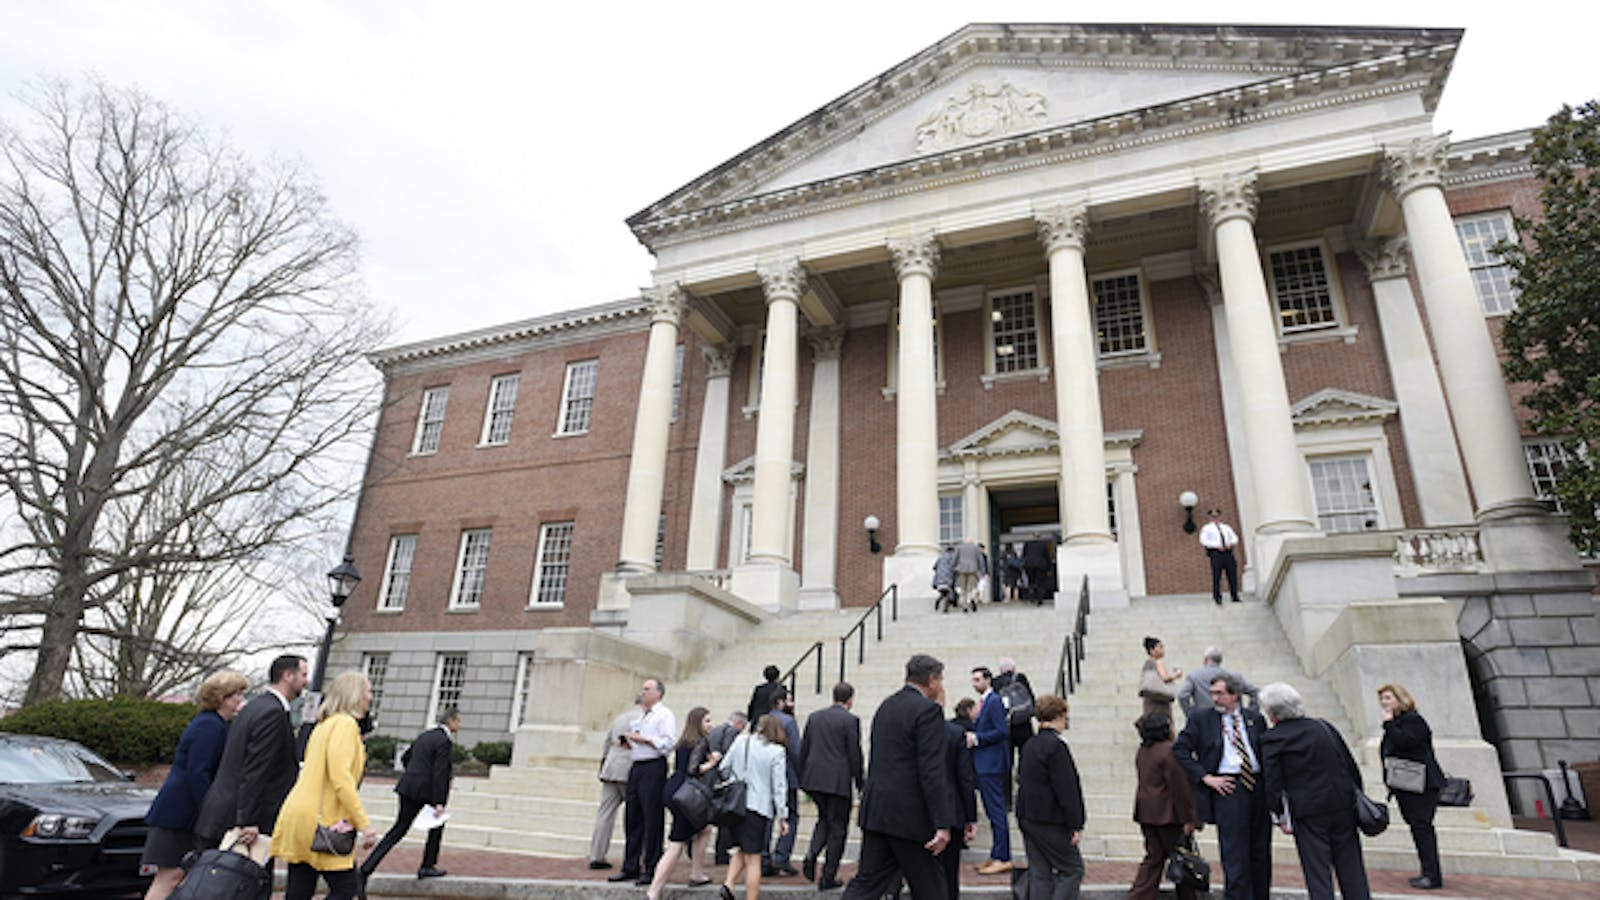 The Maryland State House in Annapolis, Md. Photo: AP.